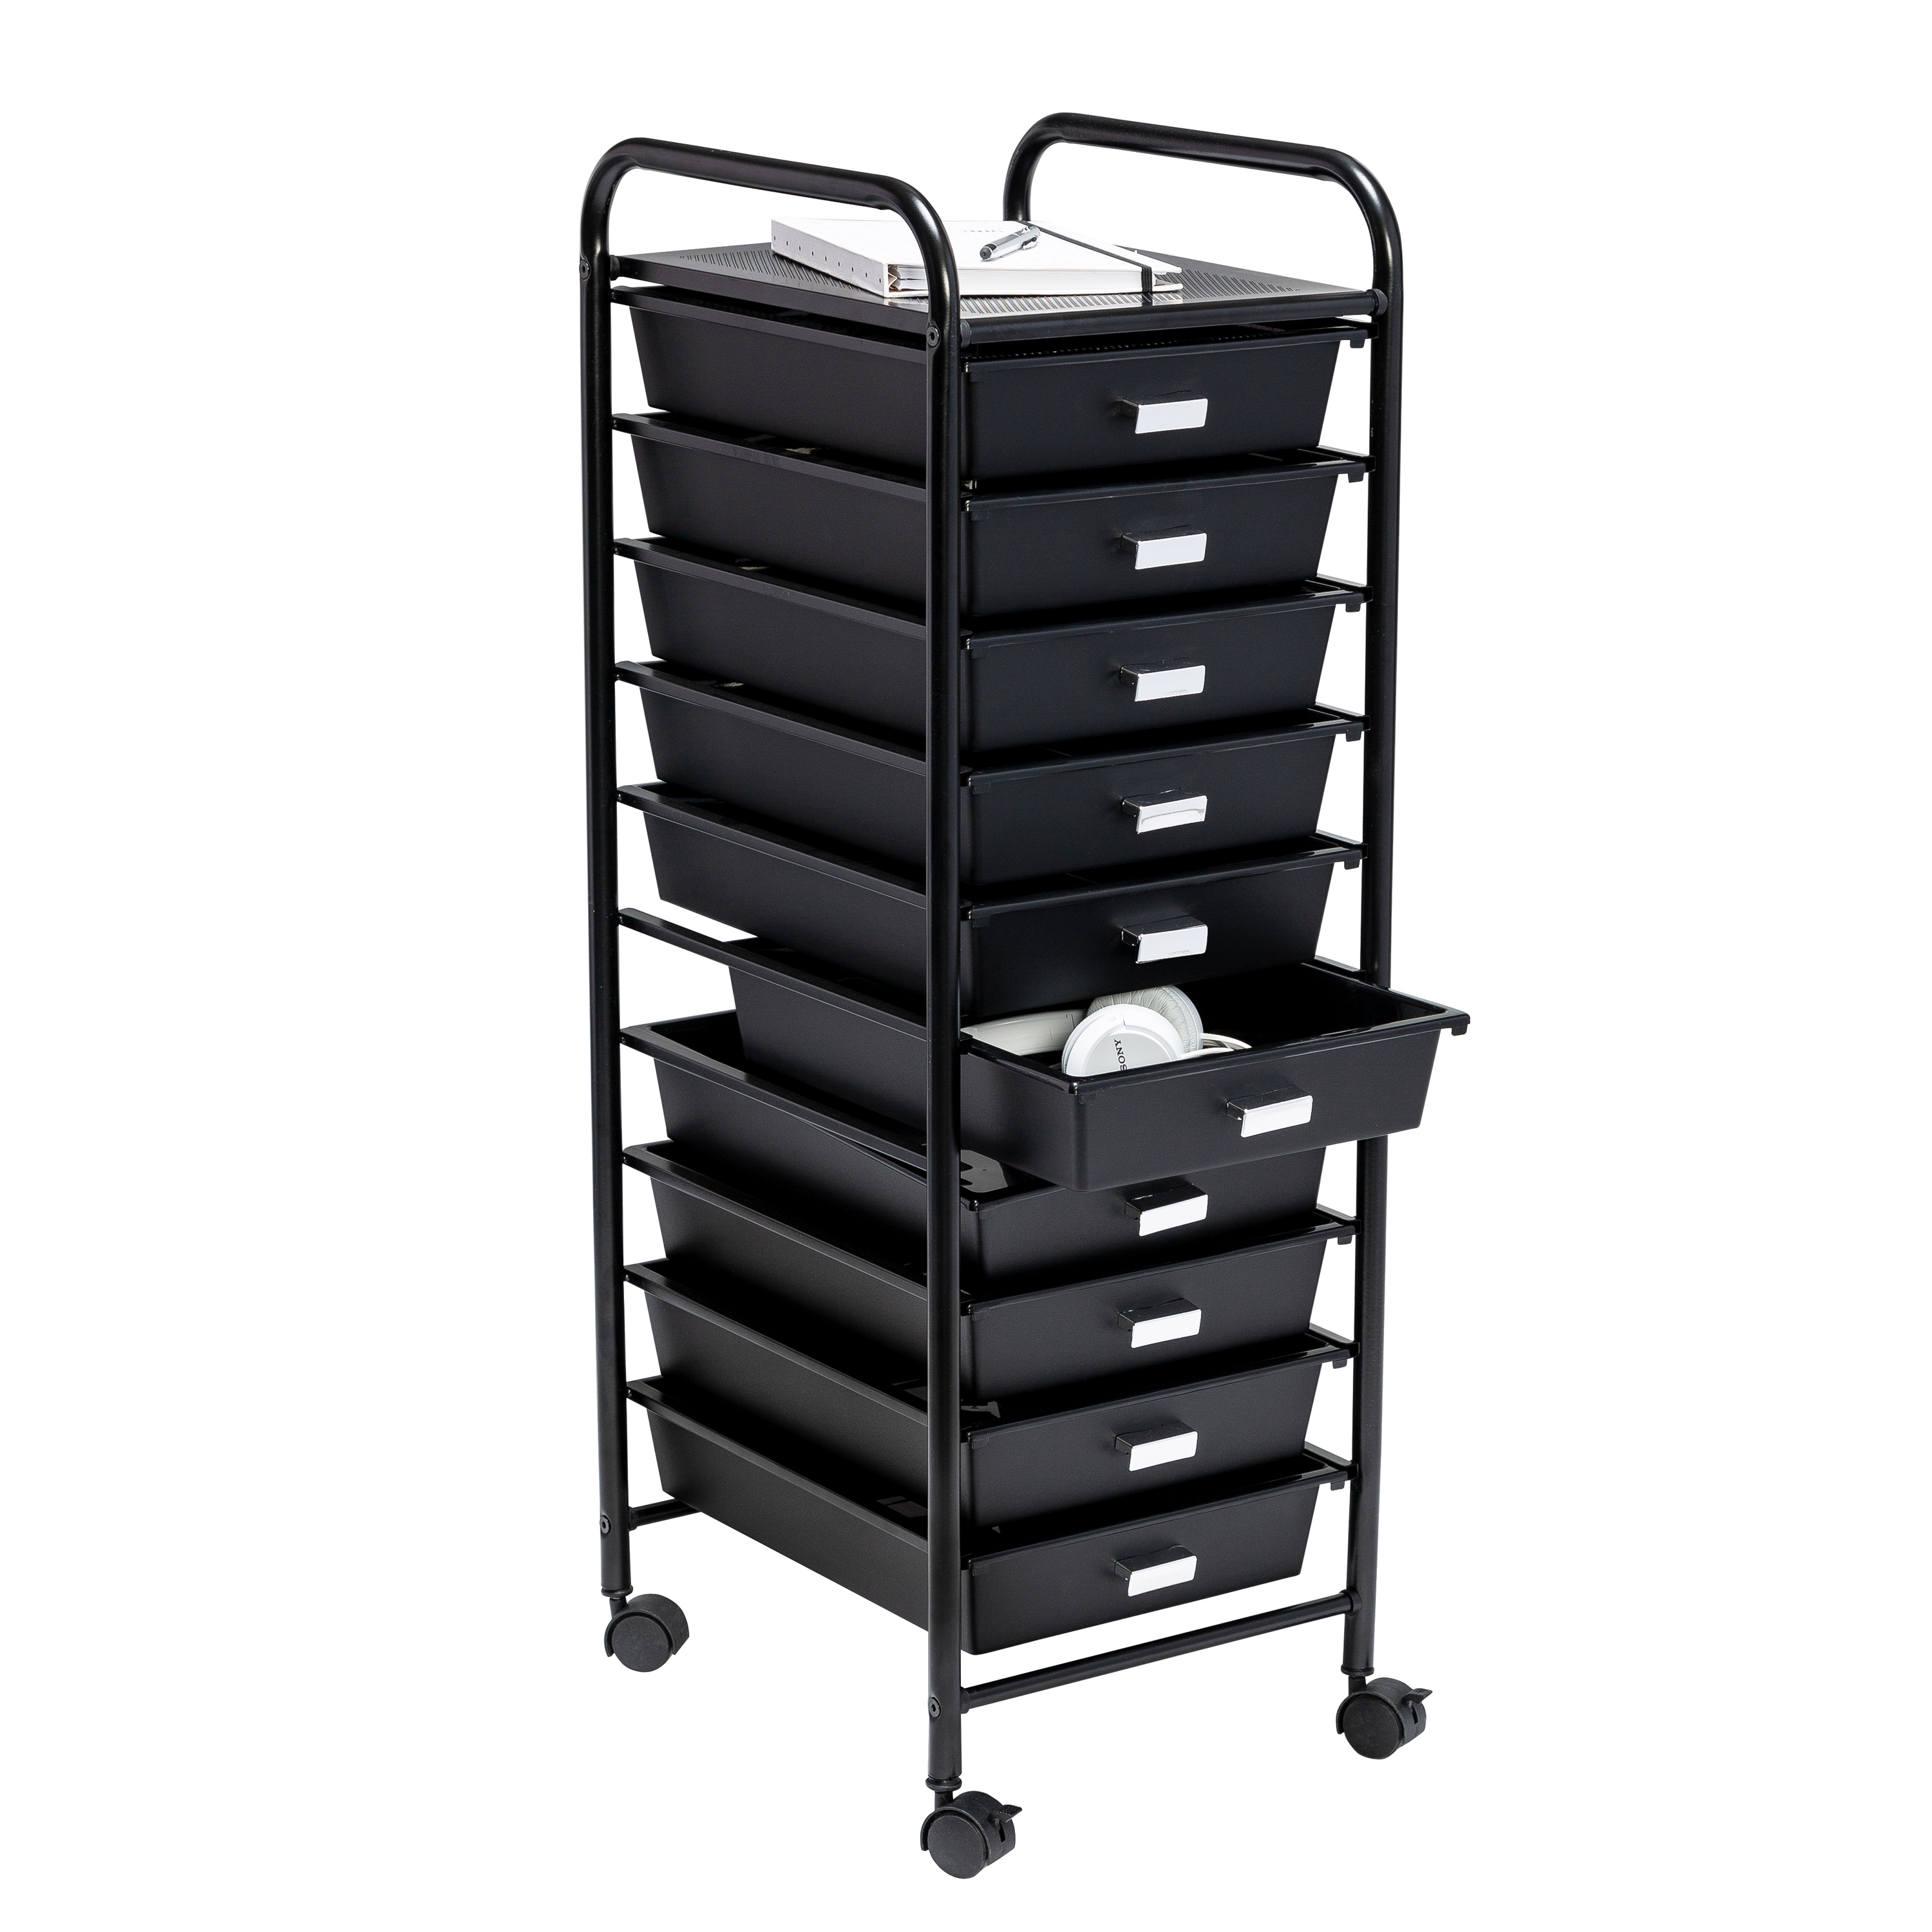 Honey-Can-Do Metal Frame Rolling Storage Cart with 10 Plastic Drawers, Black - image 4 of 9